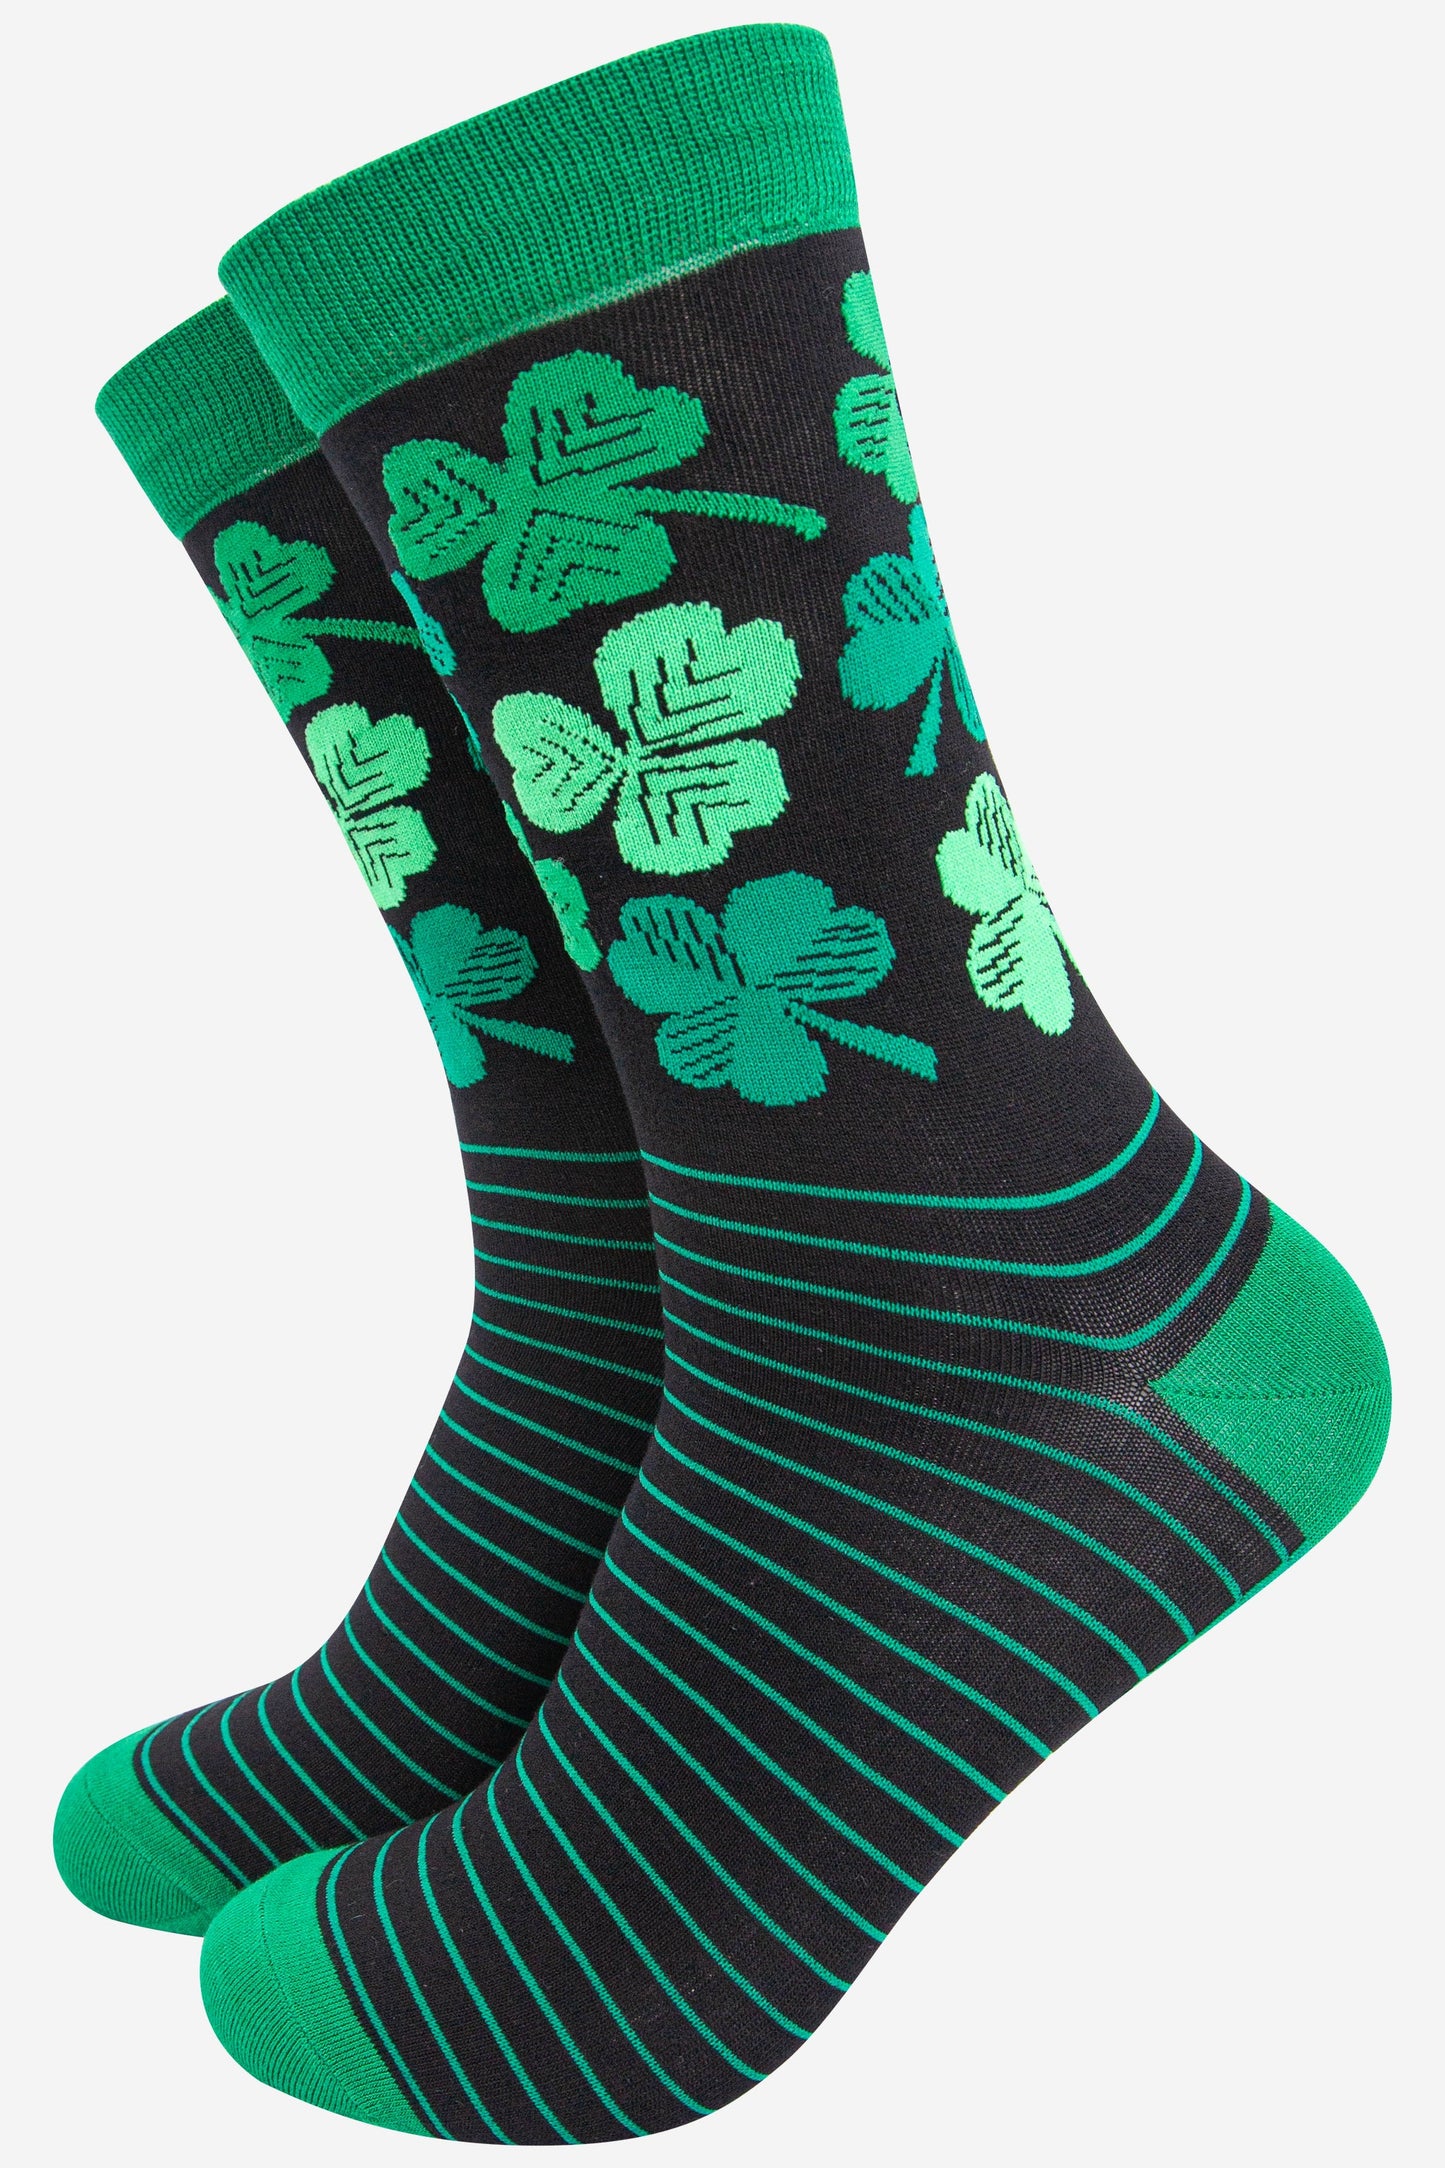 mens bamboo socks featuring an Irish Shamrock and four leaf clover in green